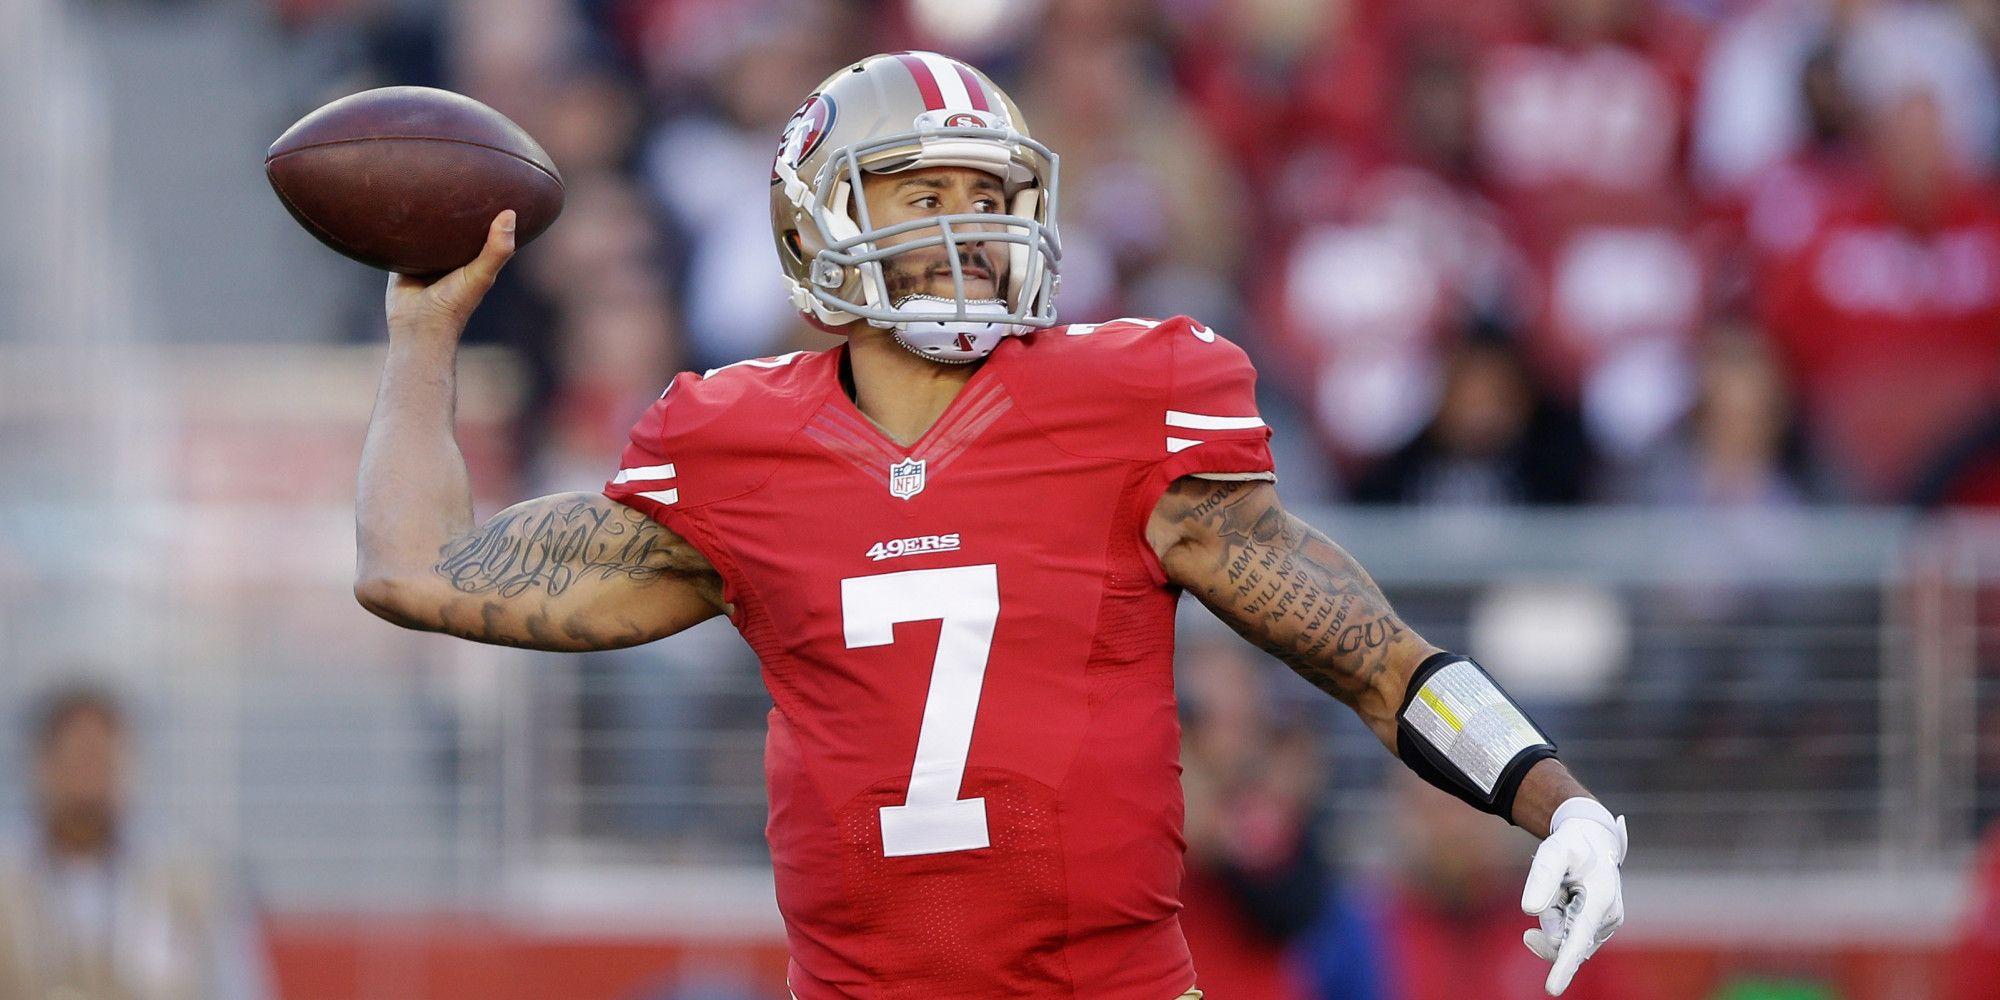 Colin Kaepernick Says He's Sorry For 'Insensitive' Instagram About